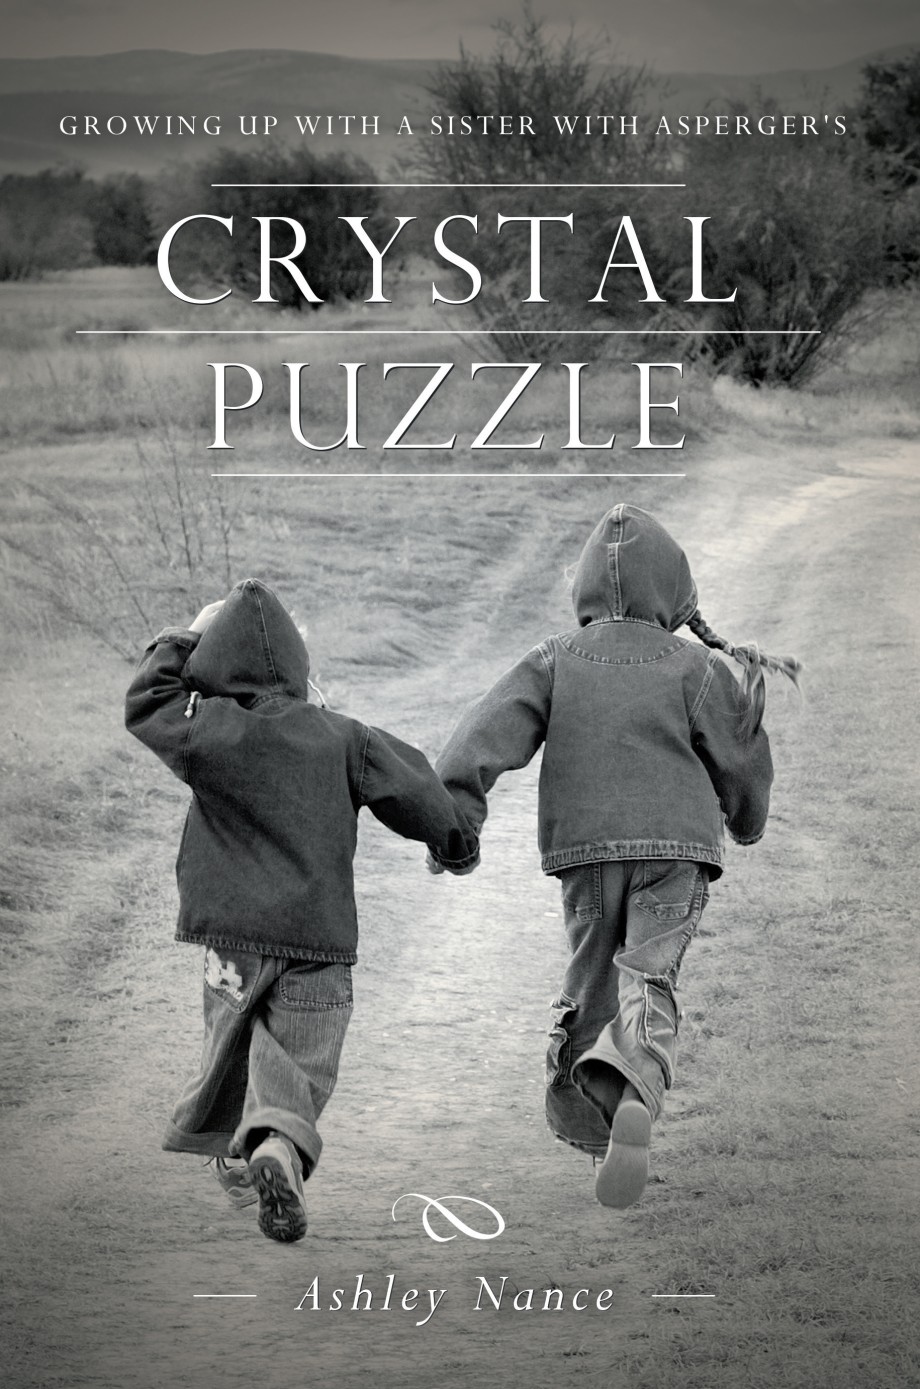 Crystal Puzzle Growing Up with a Sister with Asperger's